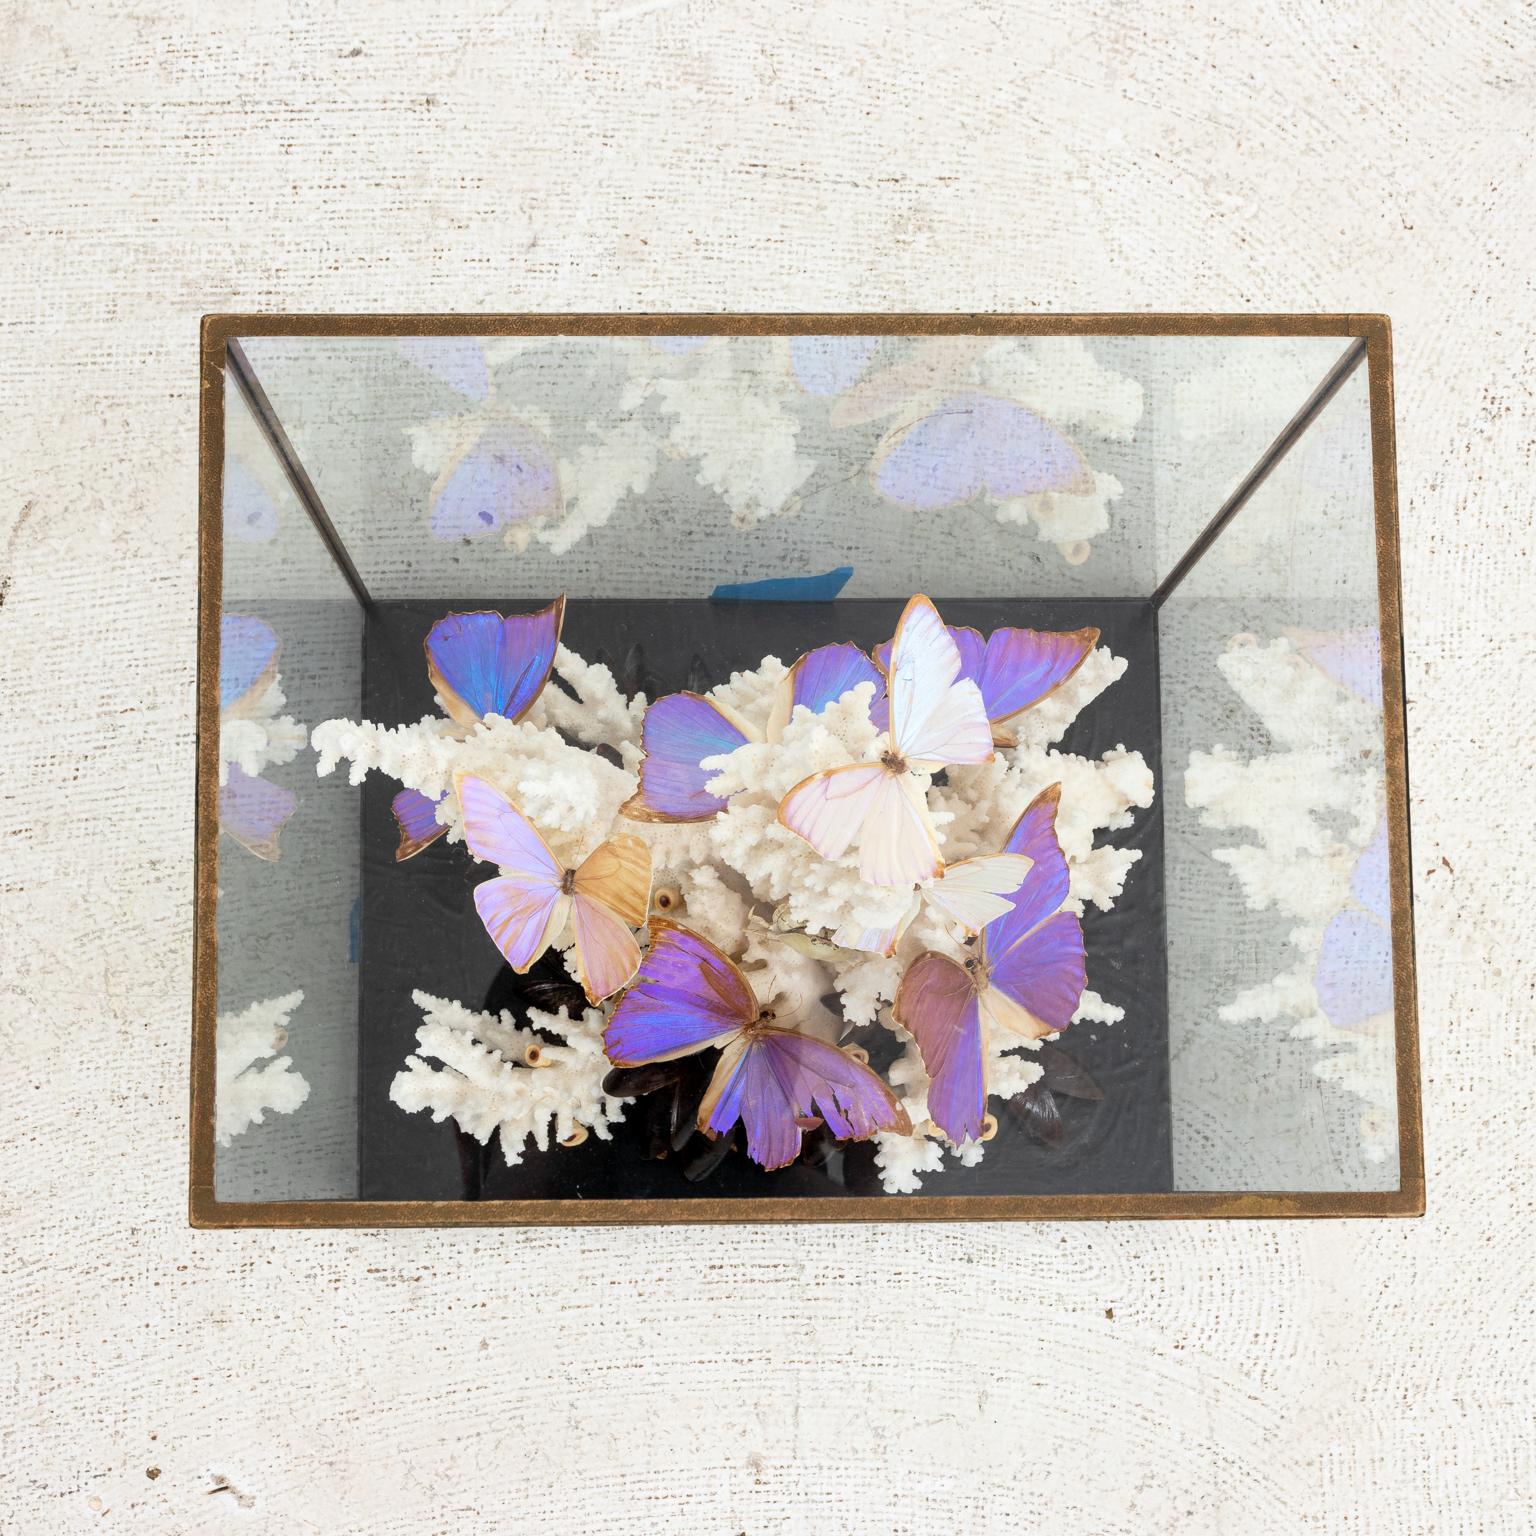 Coral and butterfly diorama in a class case, circa 1980s. Please note of wear consistent with age including distressed wear on the butterfly's wings.